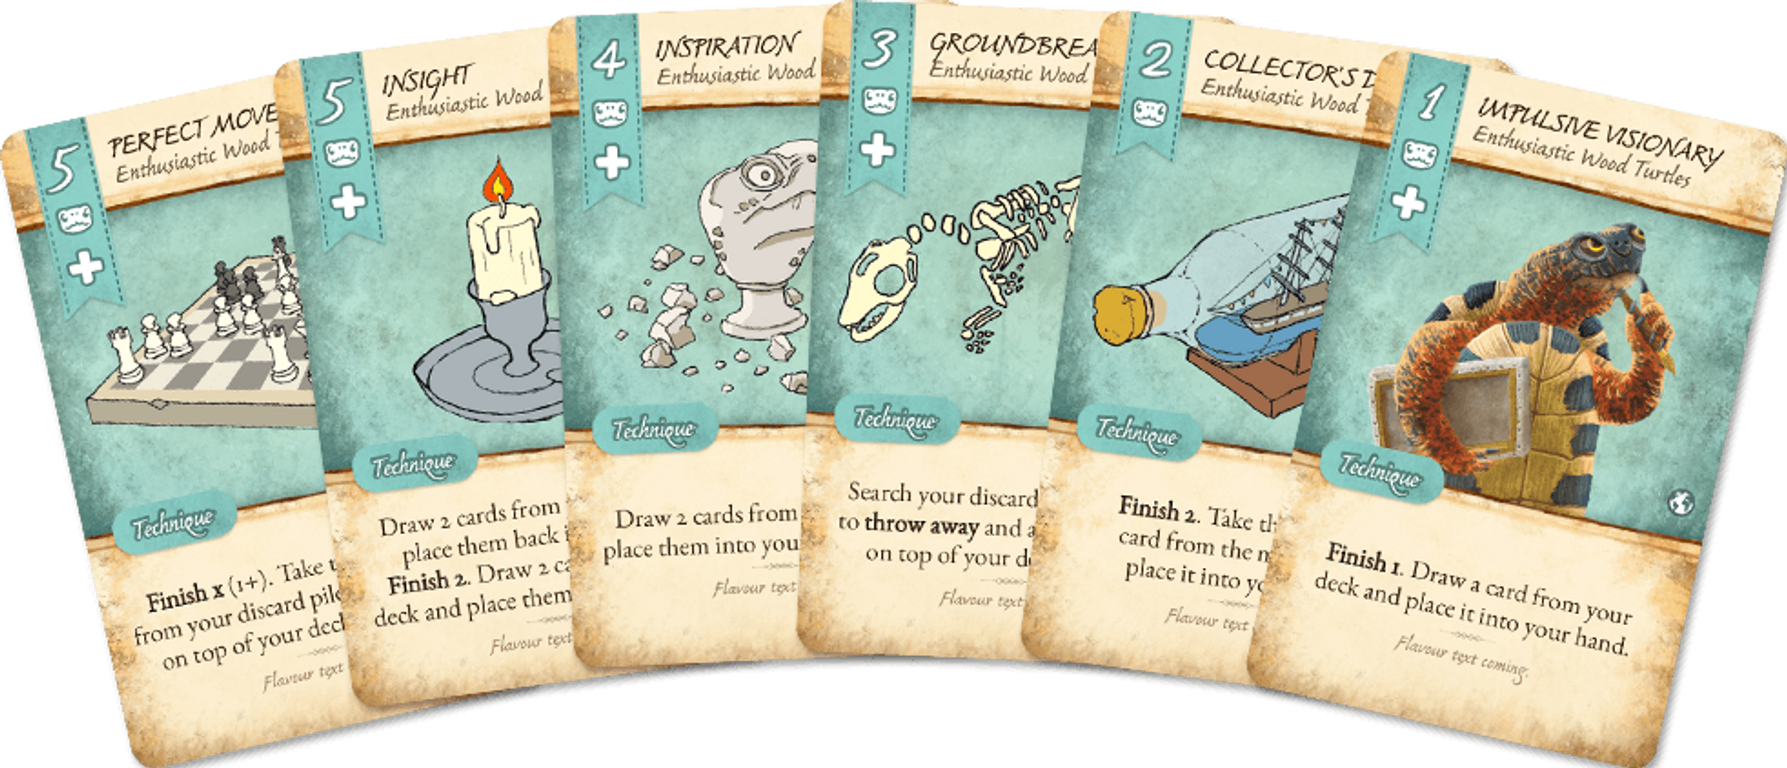 Dale of Merchants Collection cards